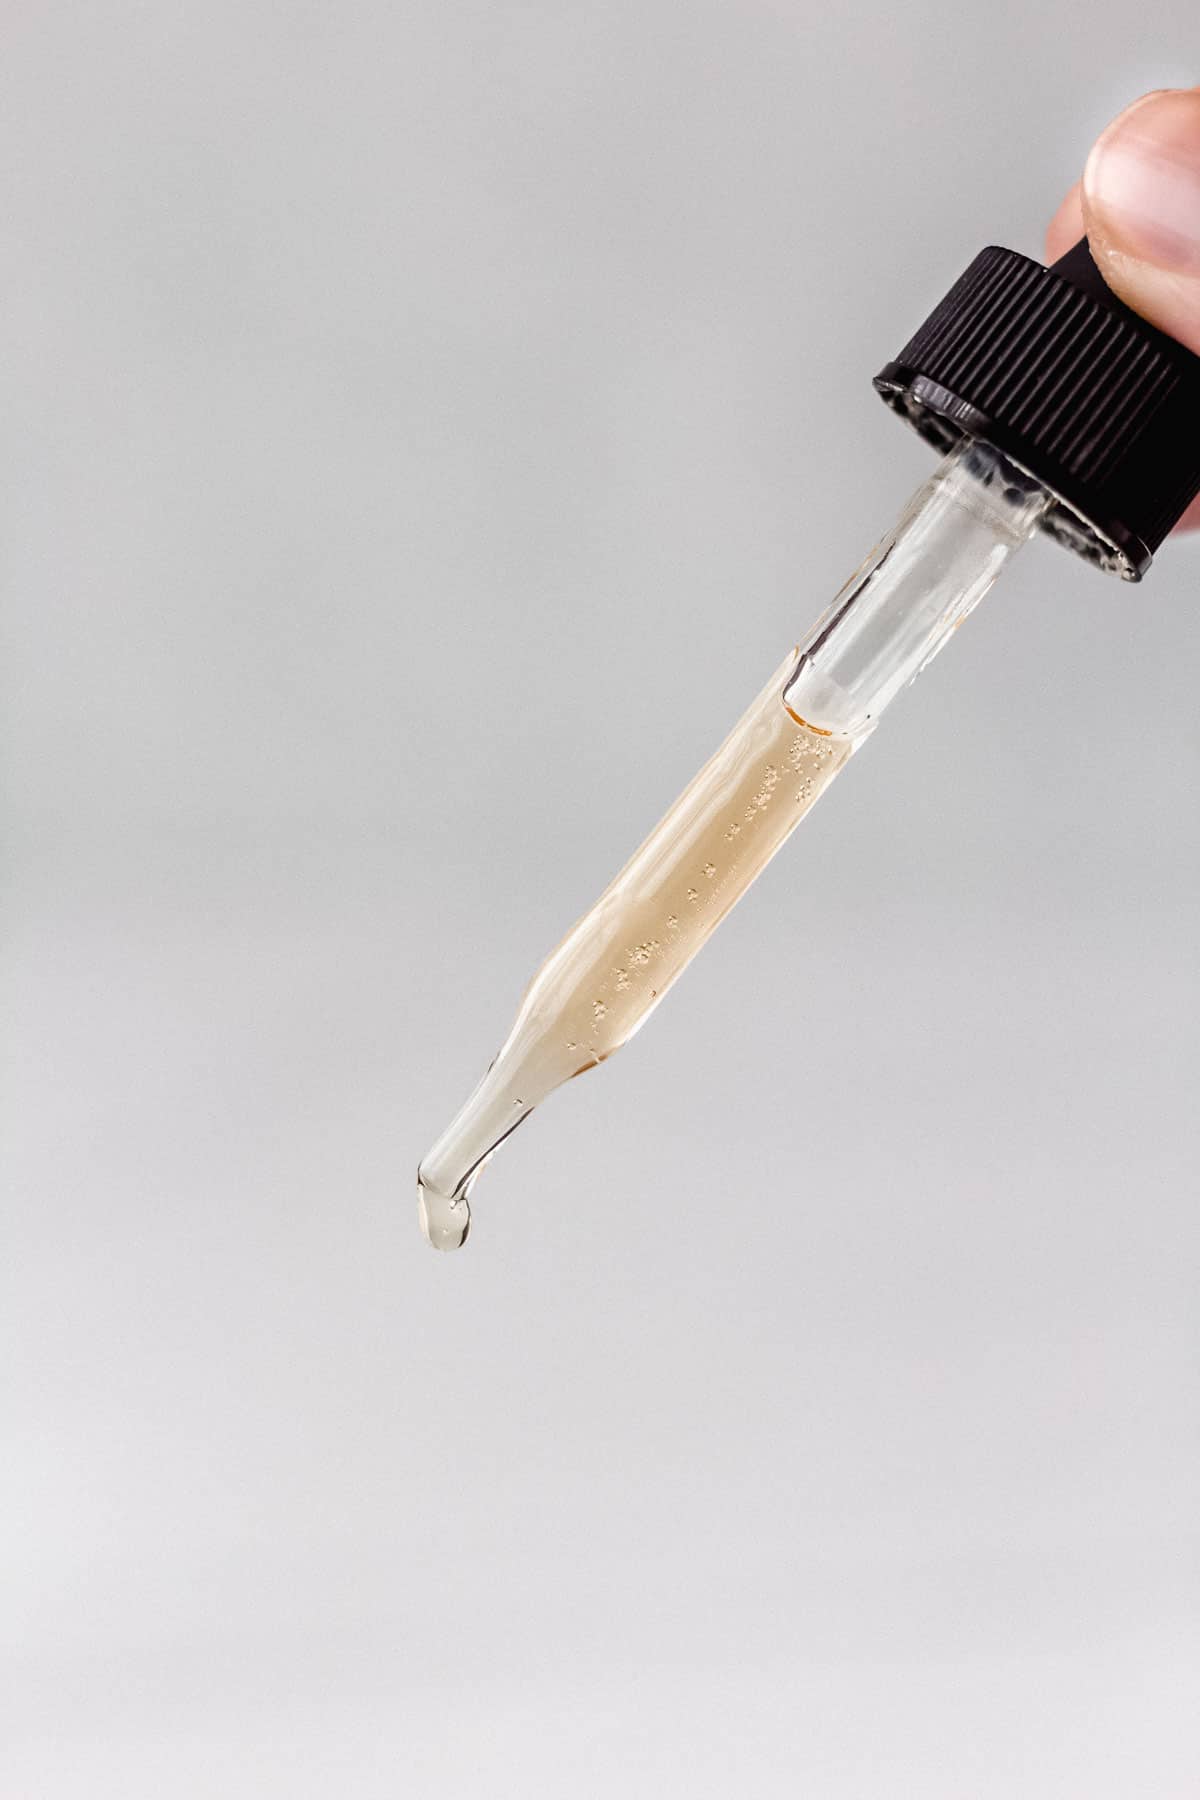 A dropper with caffeine solution dripping out of it with a gray backdrop